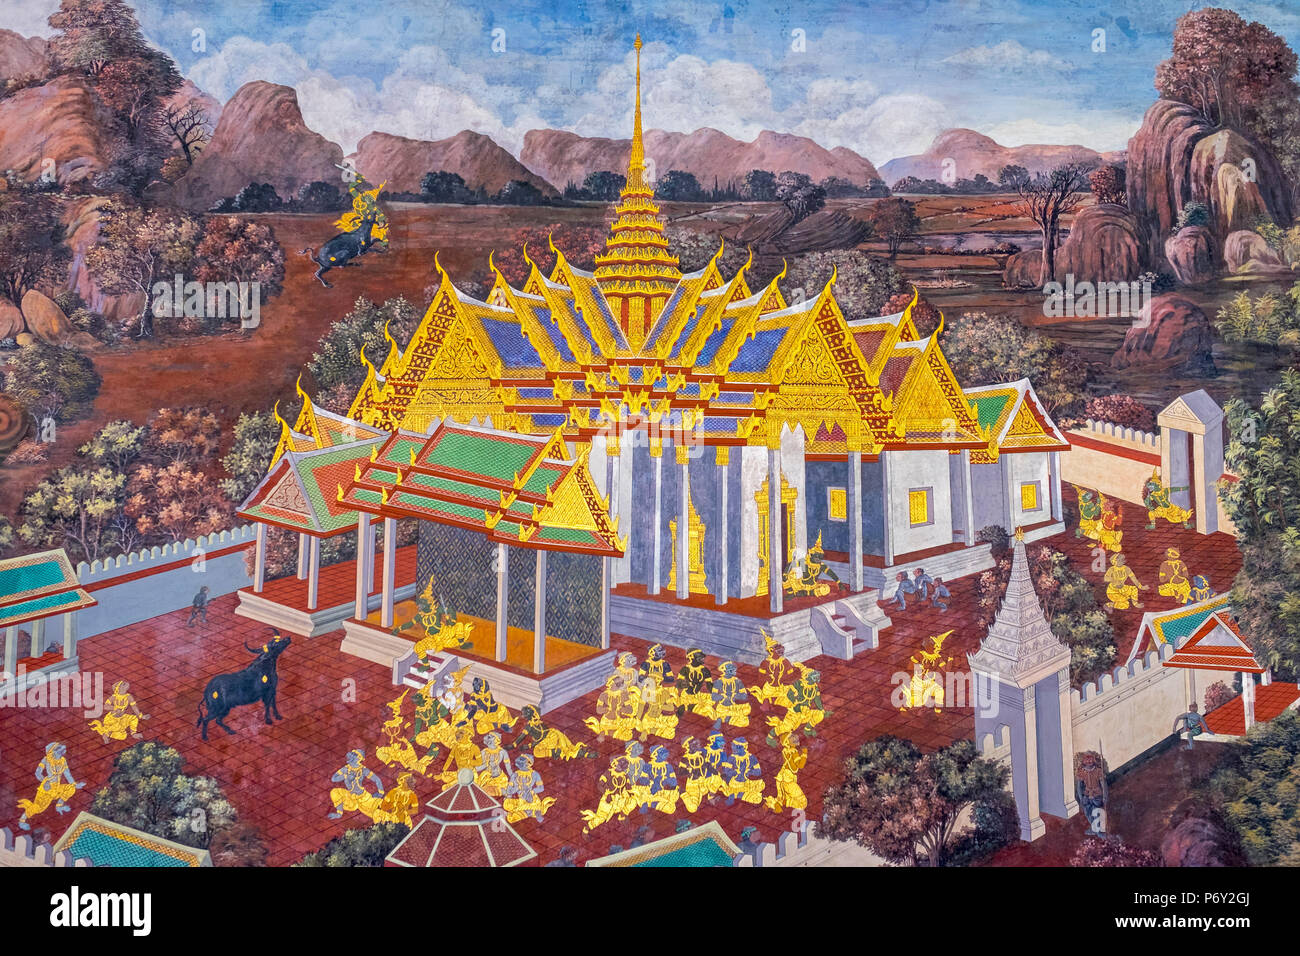 Murals depicting scenes from the Ramakien, Temple of the Emerald Buddha (Wat Phra Kaew), Grand Palace complex, Bangkok, Thailand Stock Photo